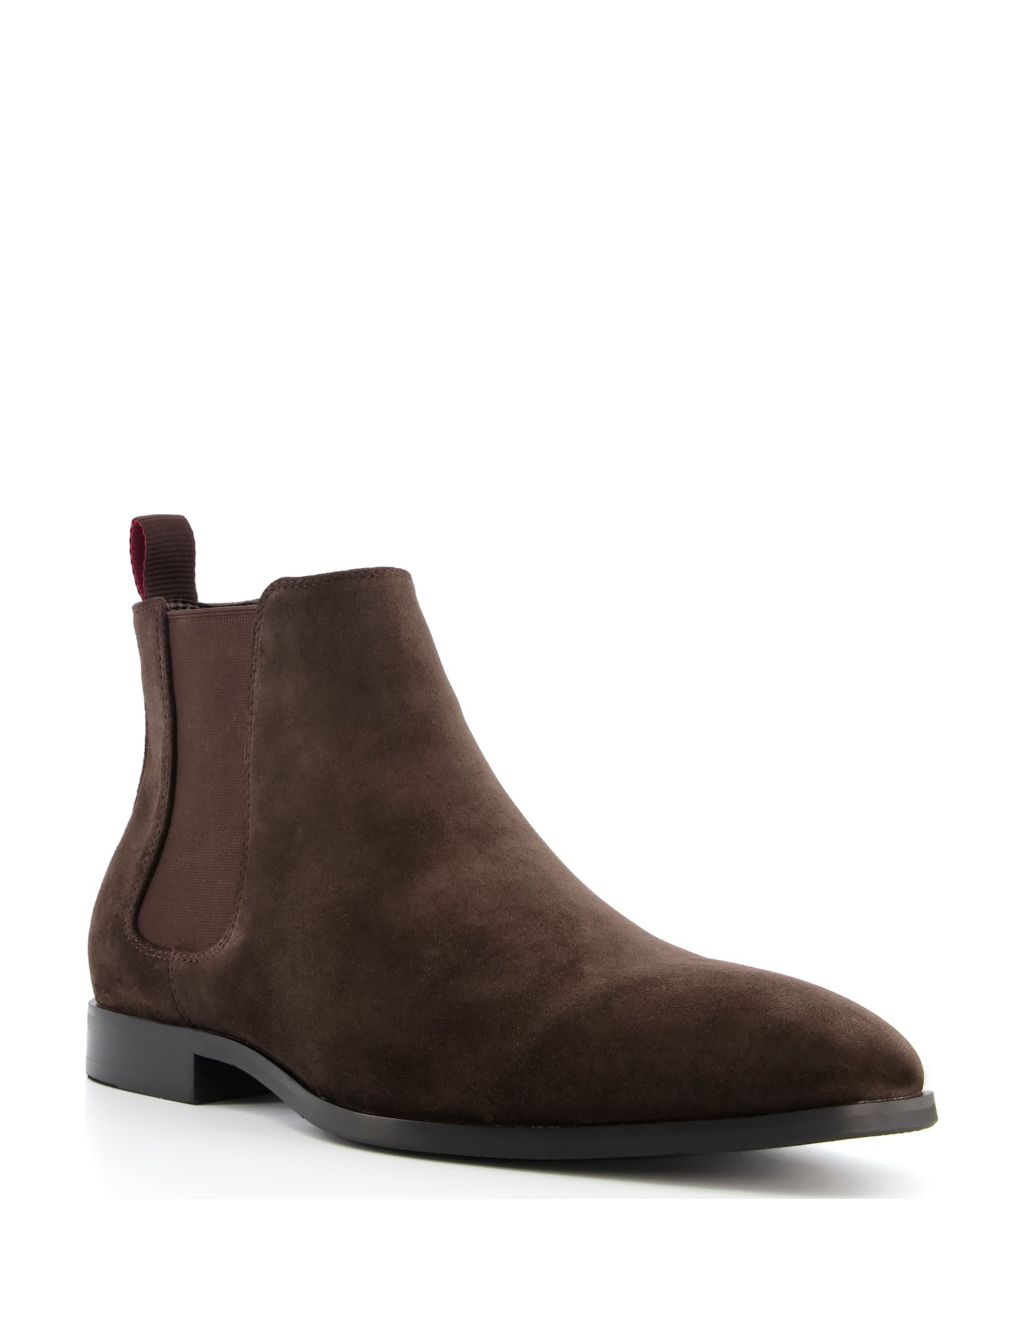 Suede Chelsea Ankle Boots image 2